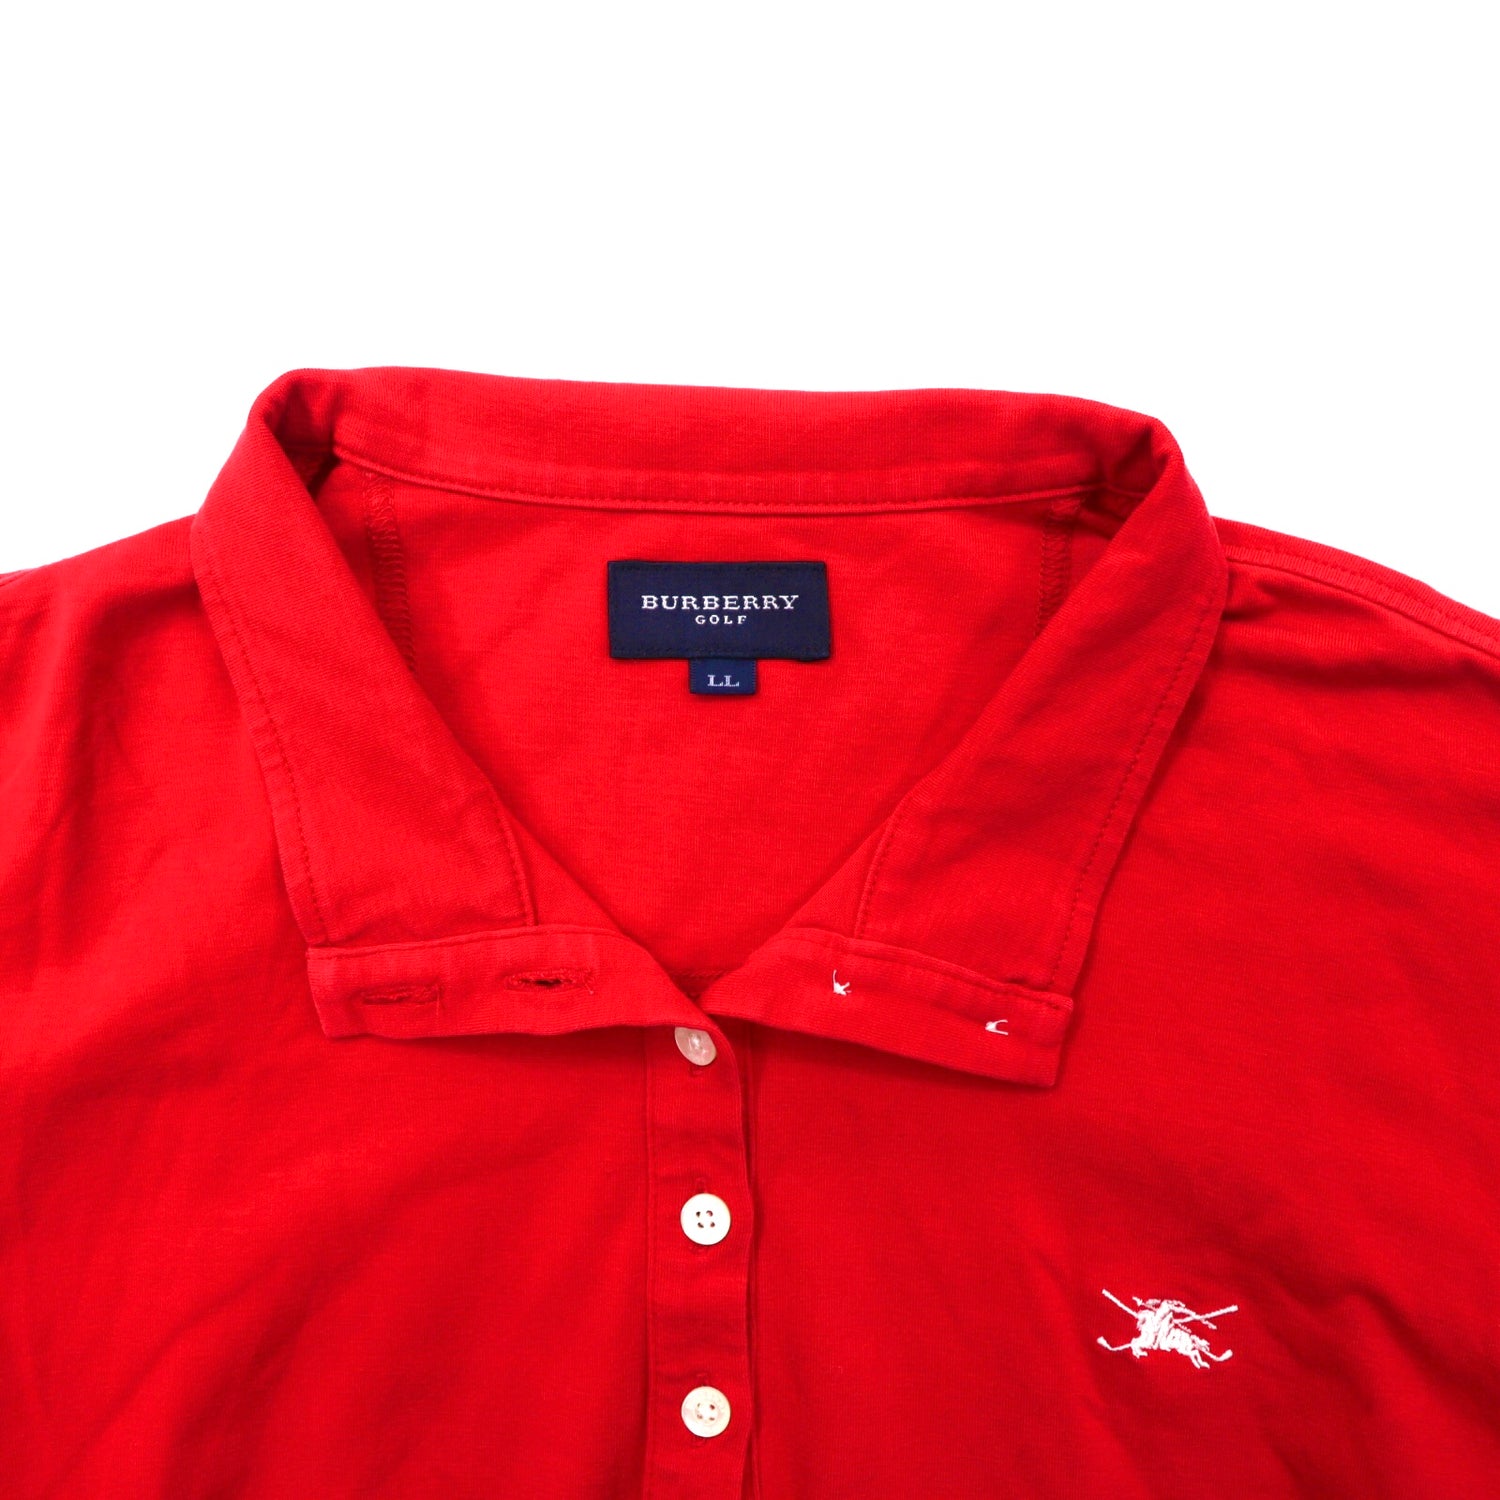 BURBERRY GOLF Long Sleeve T -shirt LL Red Logo Embroidery – 日本然 